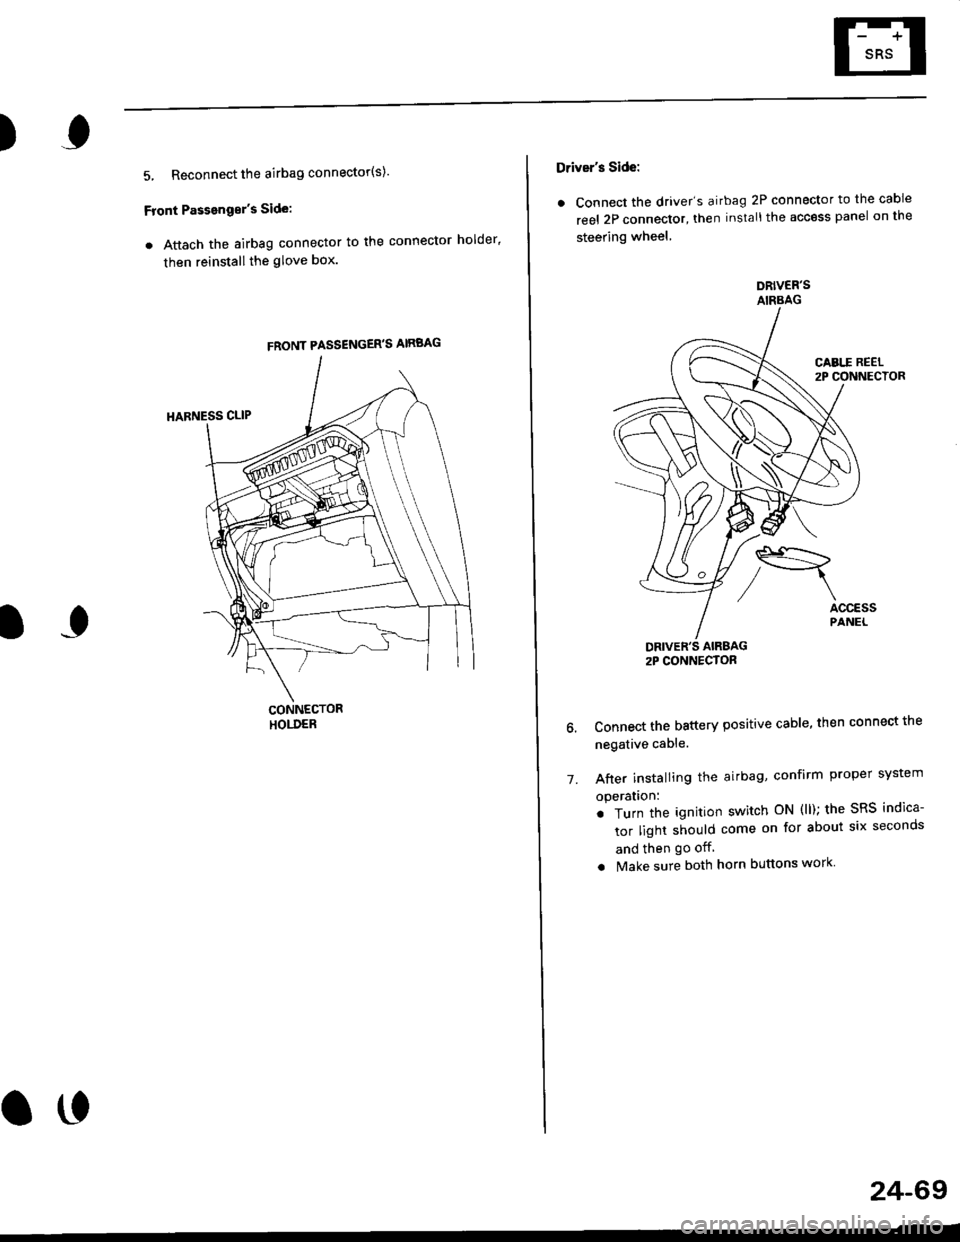 HONDA CIVIC 1996 6.G Workshop Manual )
5, Reconnect the airbag connector(s)
Front Passengors Side:
a Attach the airbag connector to the connector holder
then reinstallthe glove box.
FRONT PASSENGERS AIRBAG
oo
24-69
Drivers Side:
a C